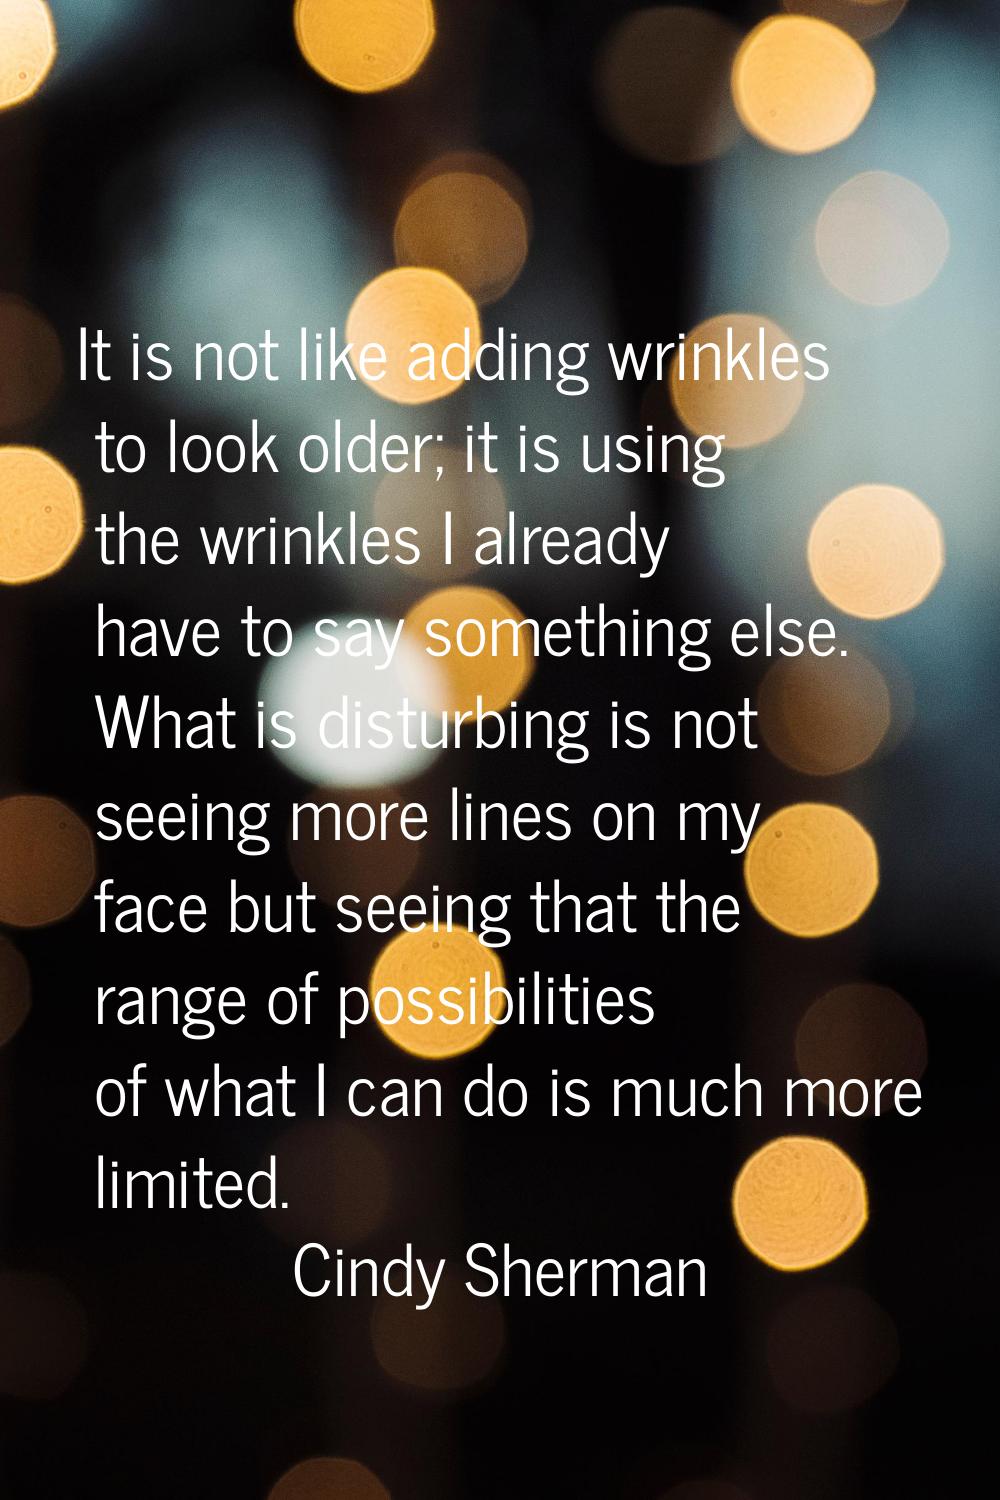 It is not like adding wrinkles to look older; it is using the wrinkles I already have to say someth